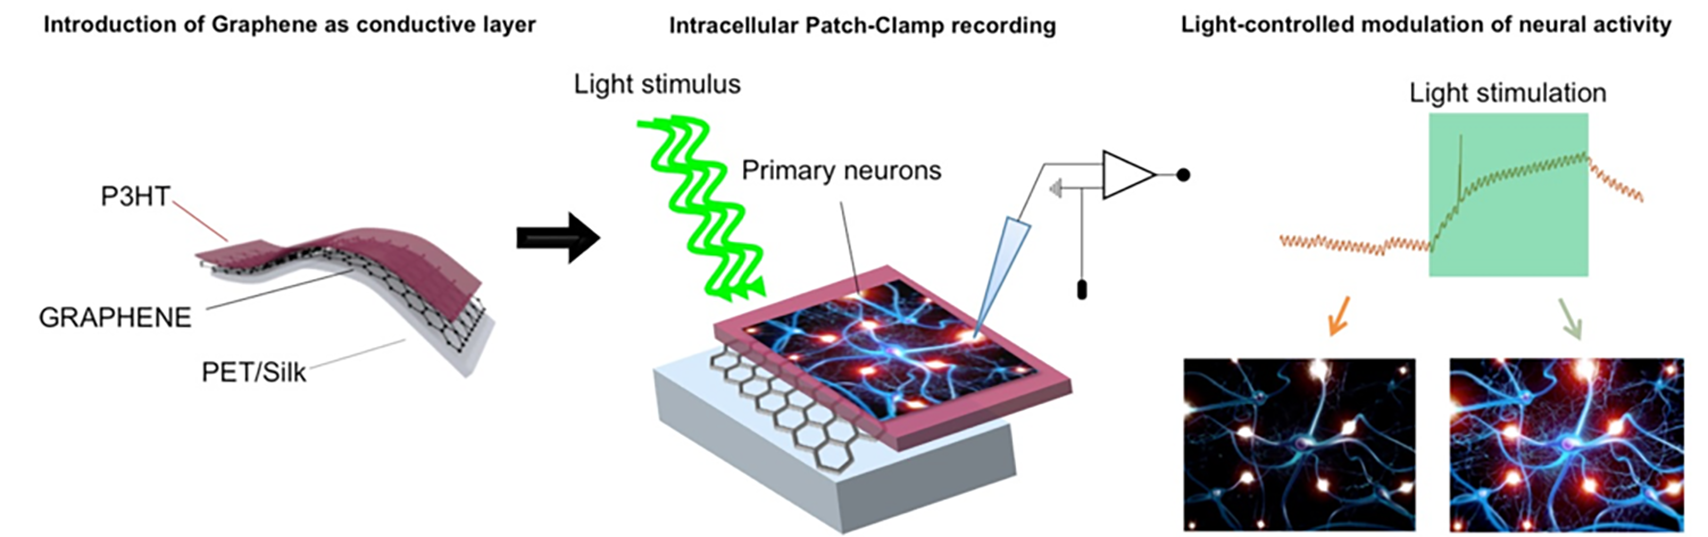 Schematic illustrating the Graphene-based interfaces for photostimulation of excitable tissues.